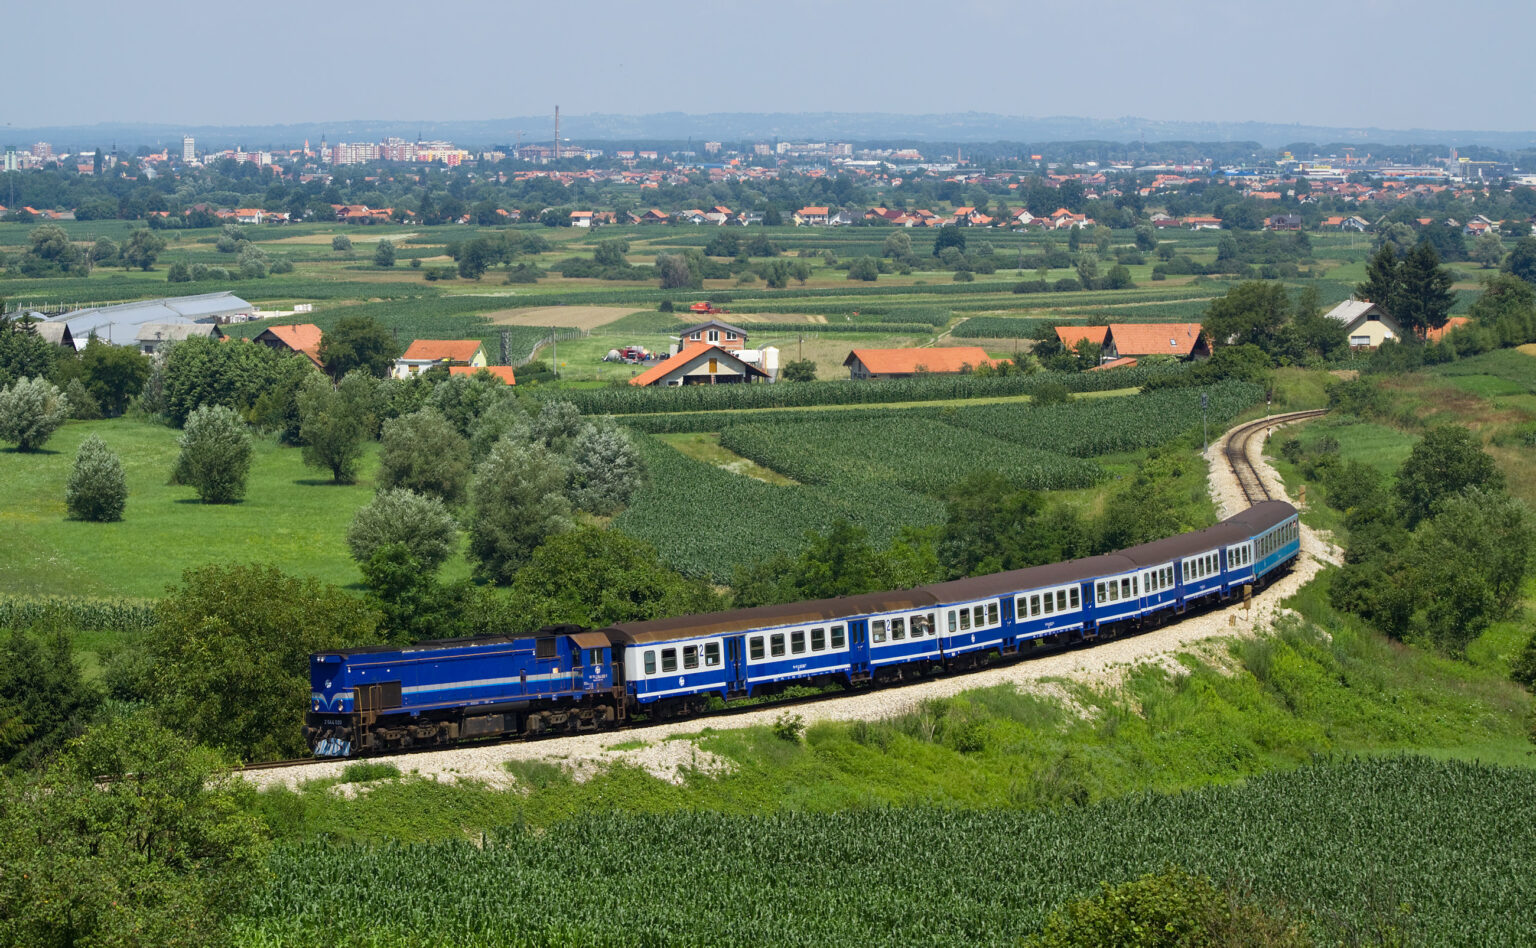 The eight best train trips in the world